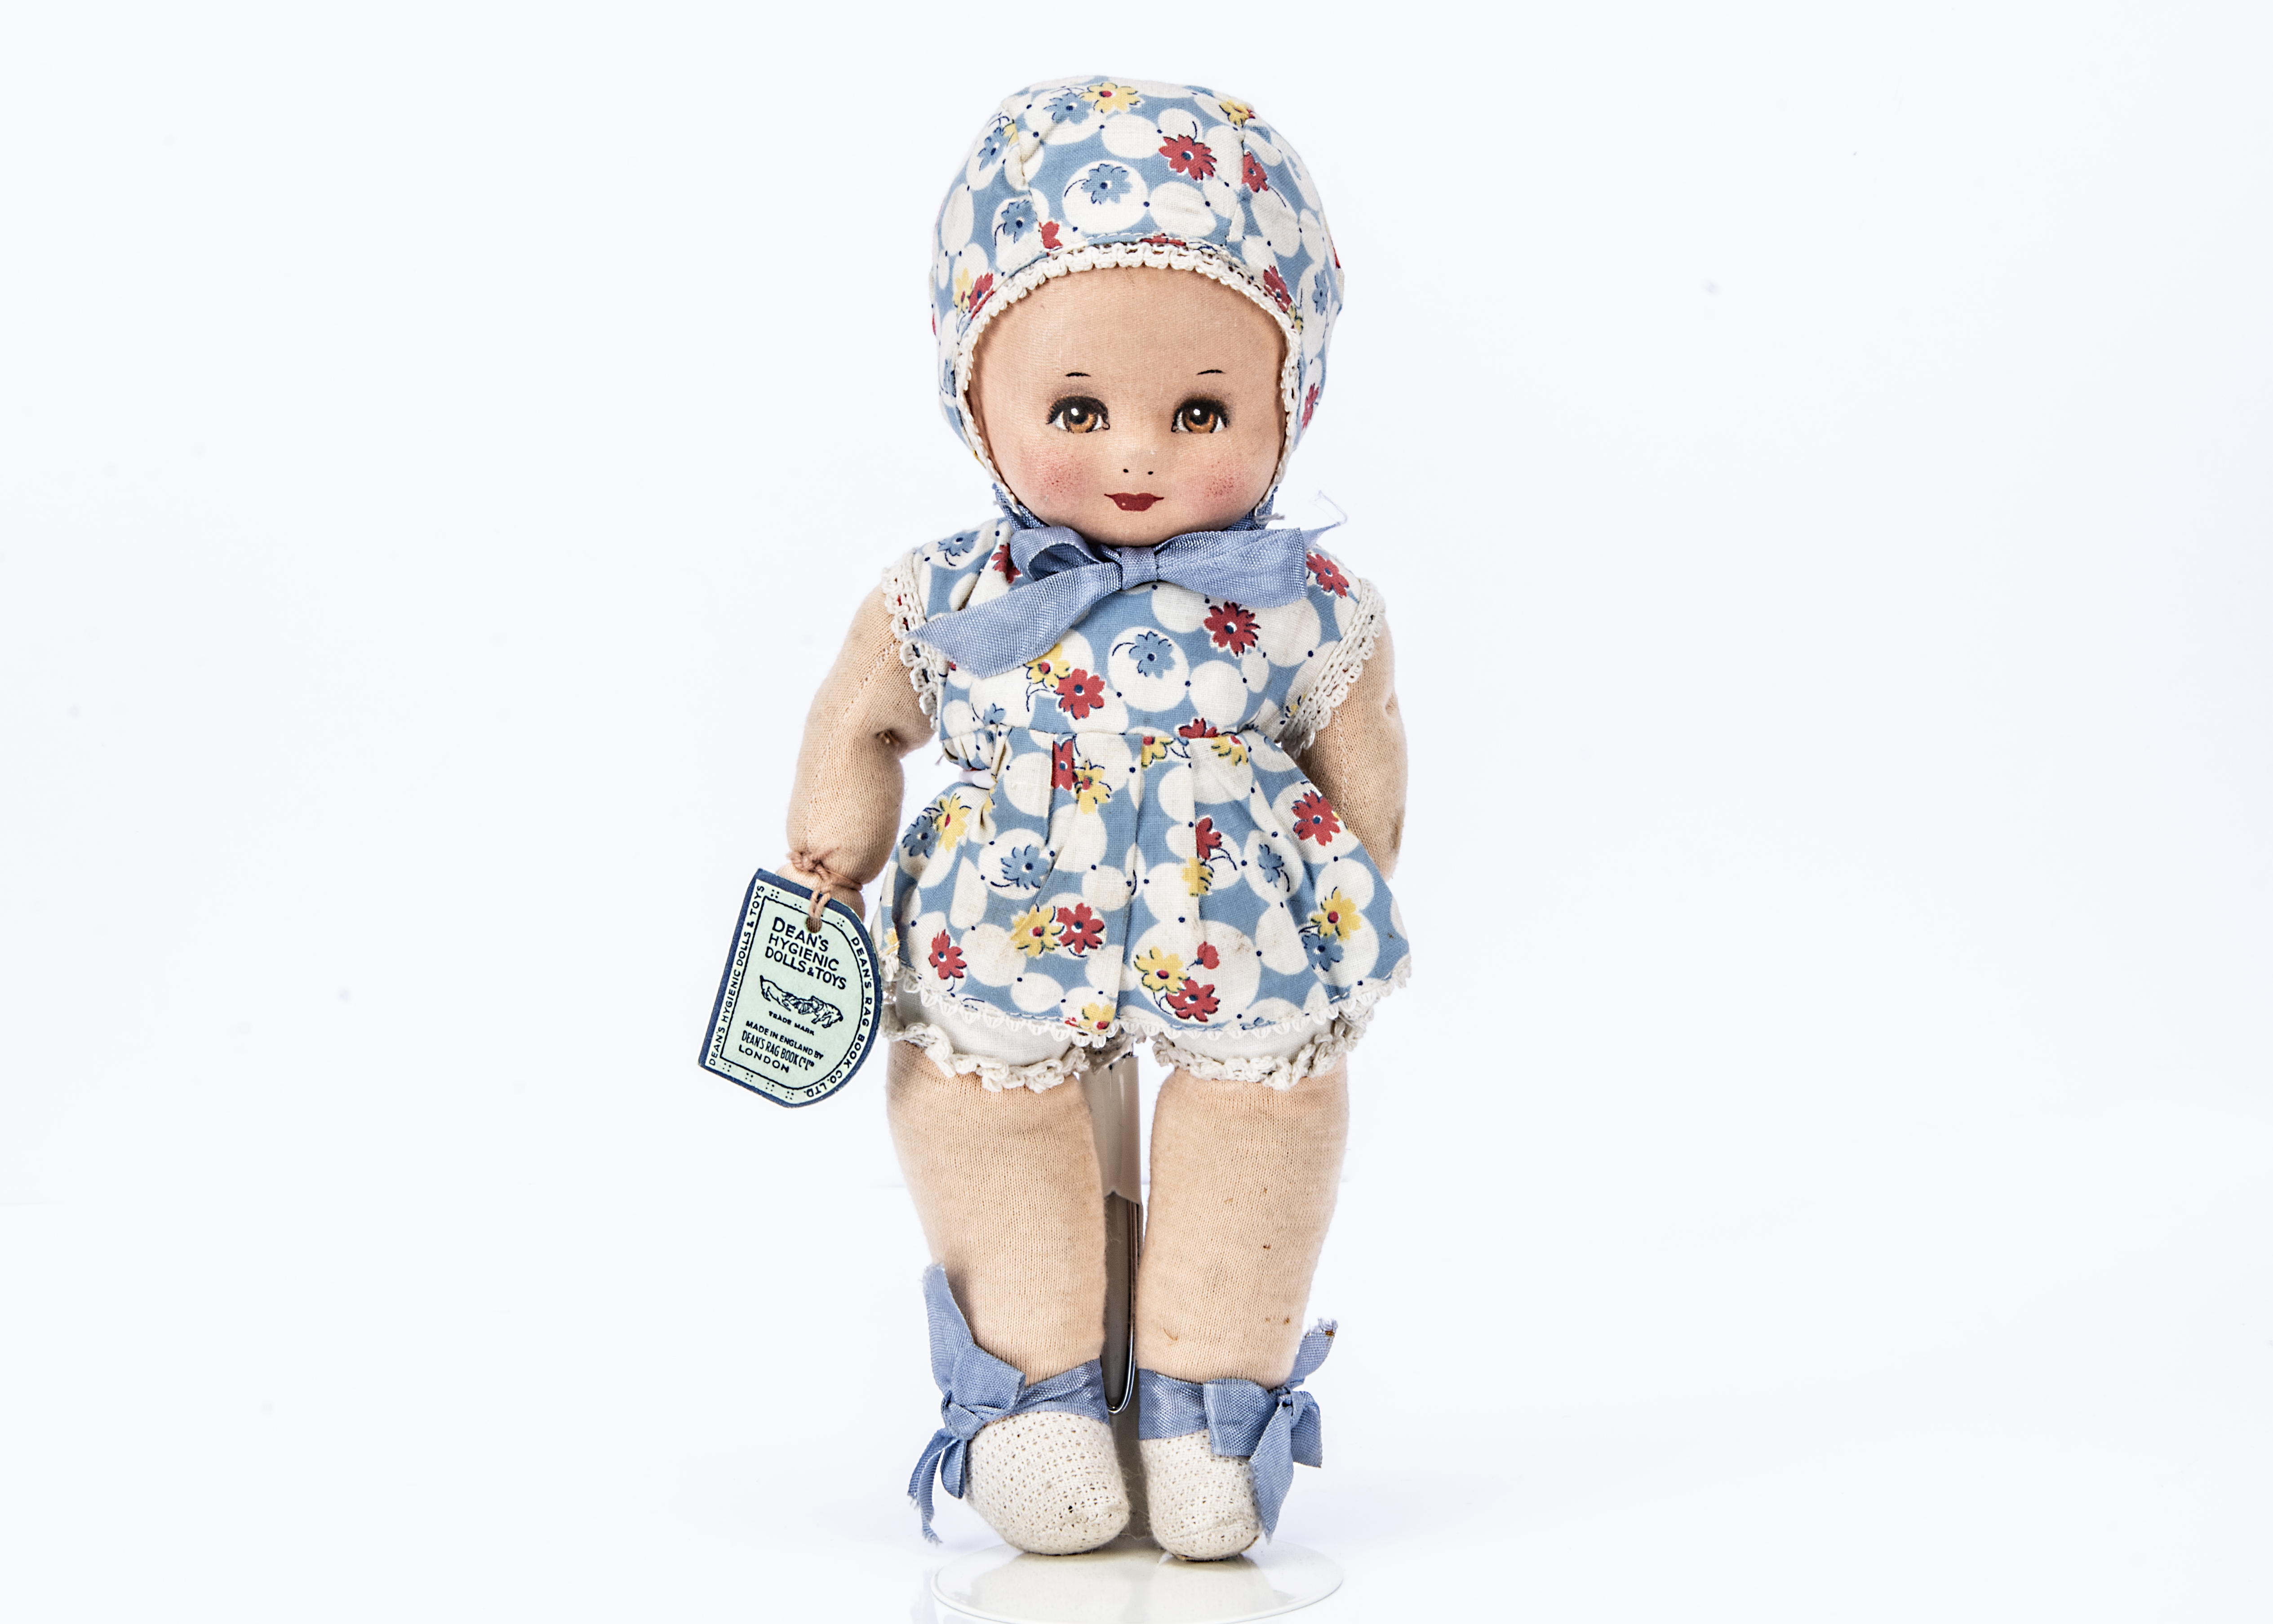 A Dean's Rag Book Co Baby Doll with card tag, from a Collection of Dean's Rag Book Co Dolls and Toys